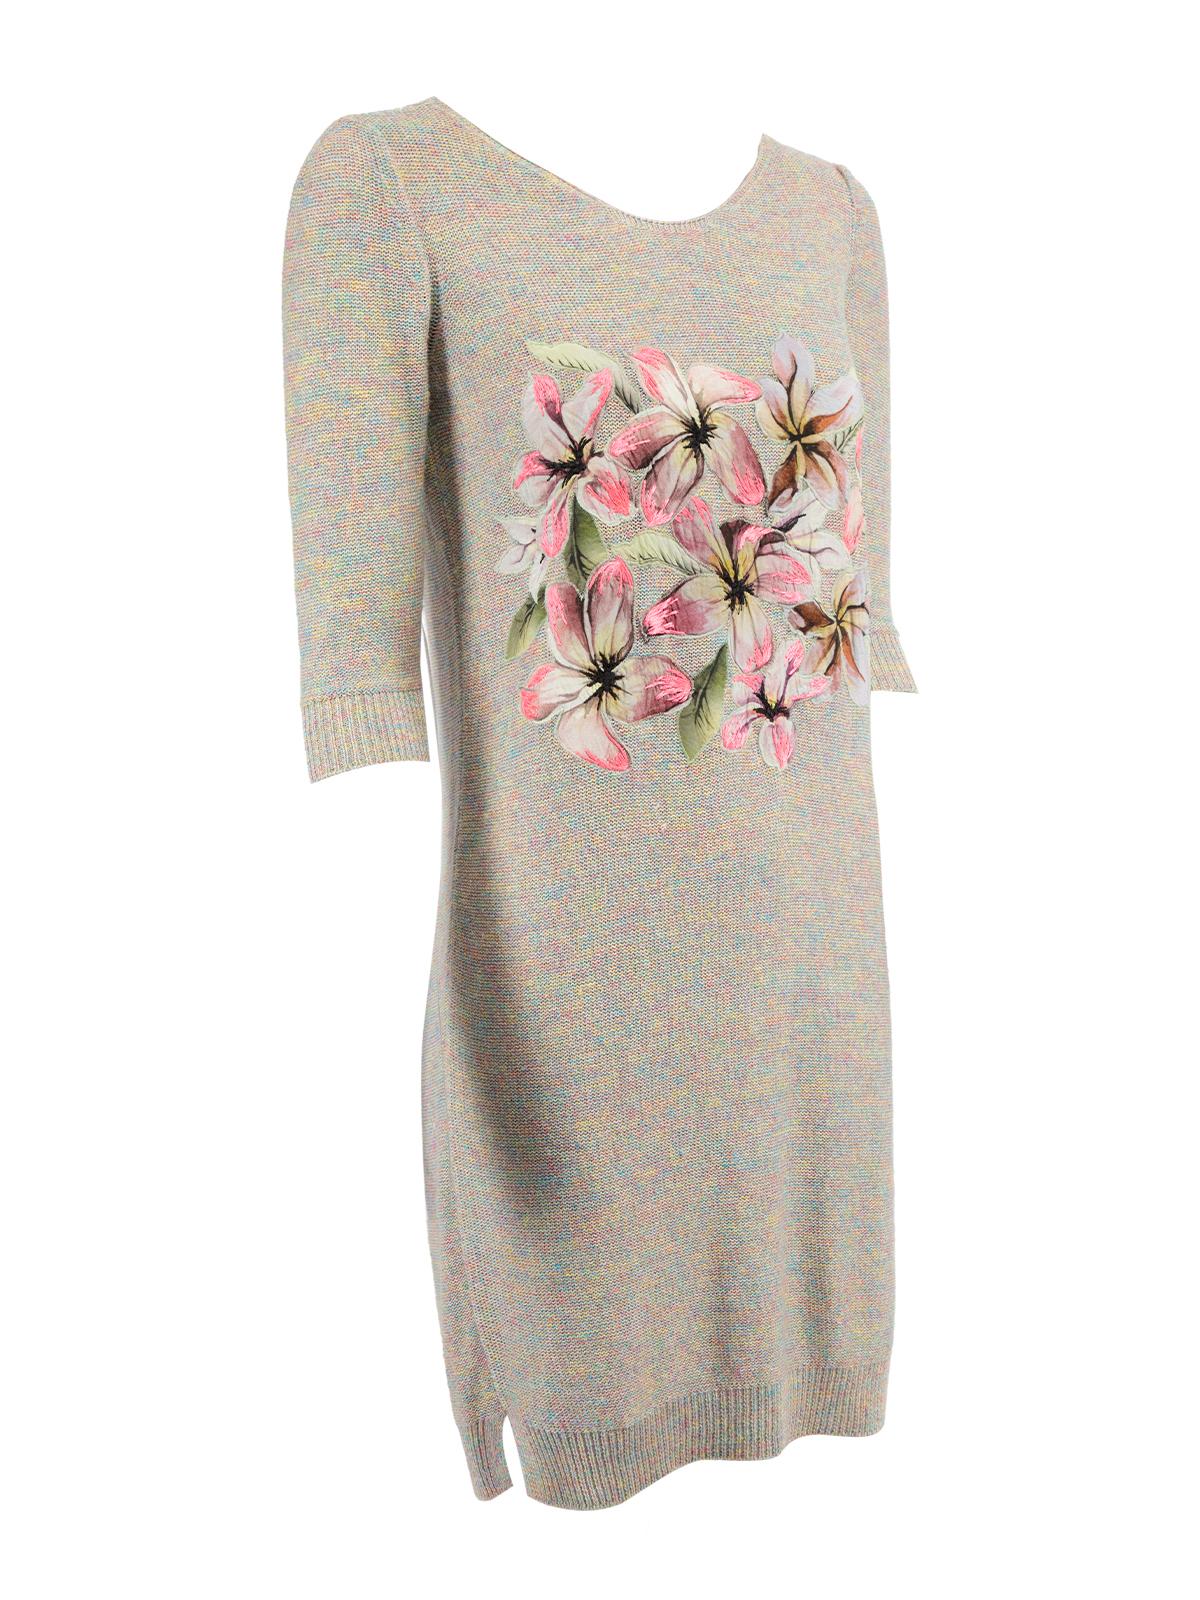 CONDITION is Very good. Hardly any visible wear to dress is evident on this used Stella McCartney designer resale item. Details Multicolour- Grey tone, pink, purple and green Silk Knit dress 3/4 sleeves Knee length Round neckline Floral design